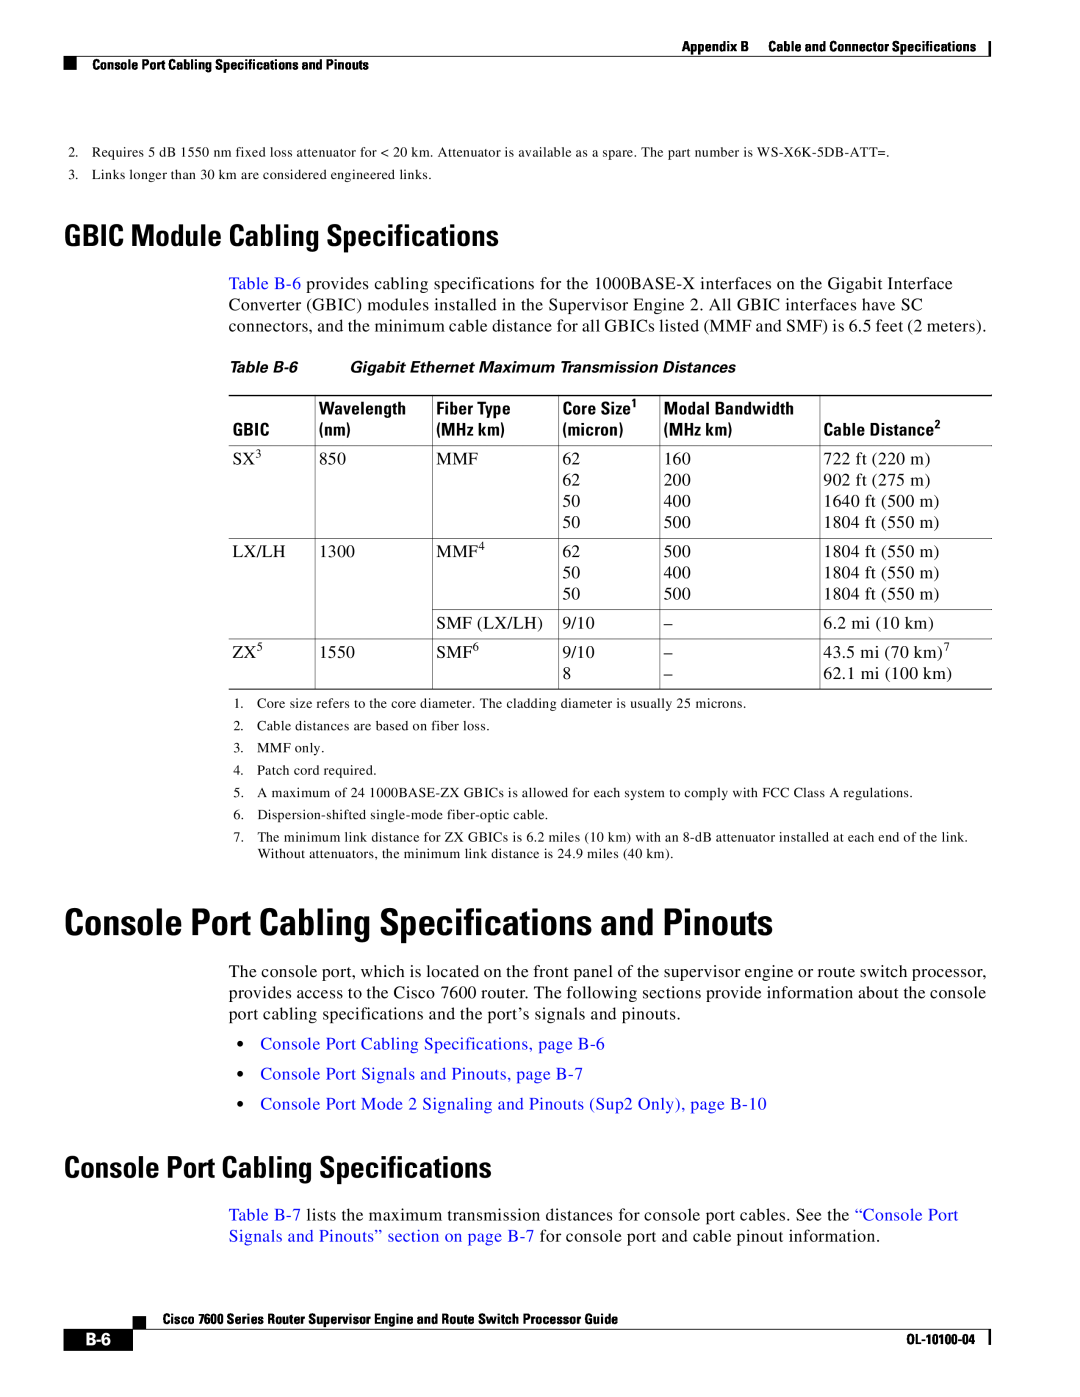 Cisco Systems 7600 manual Console Port Cabling Specifications and Pinouts, GBIC Module Cabling Specifications 